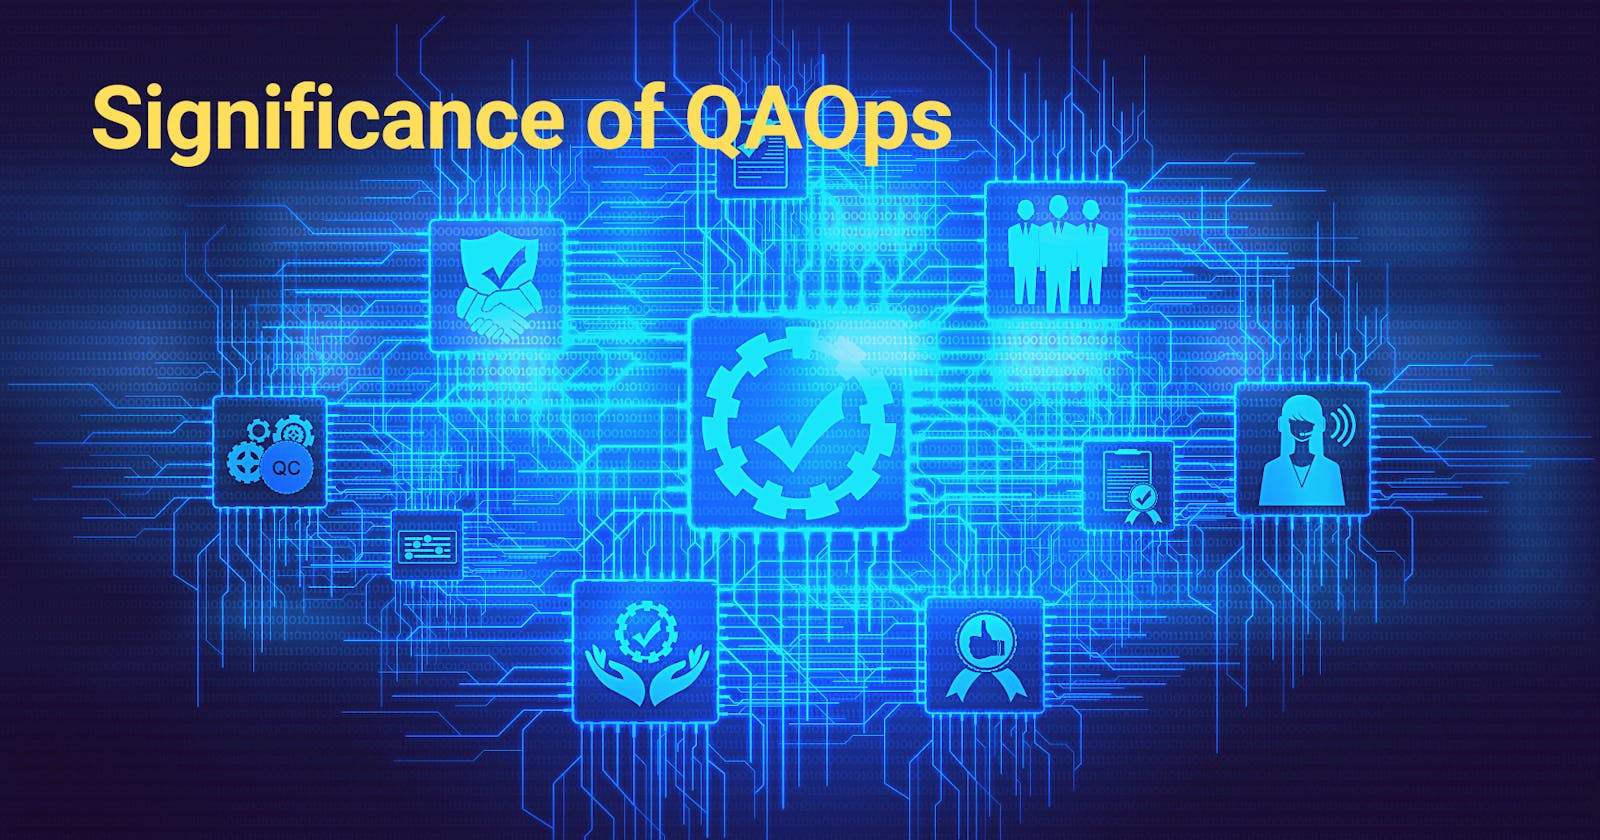 Significance of QAOps